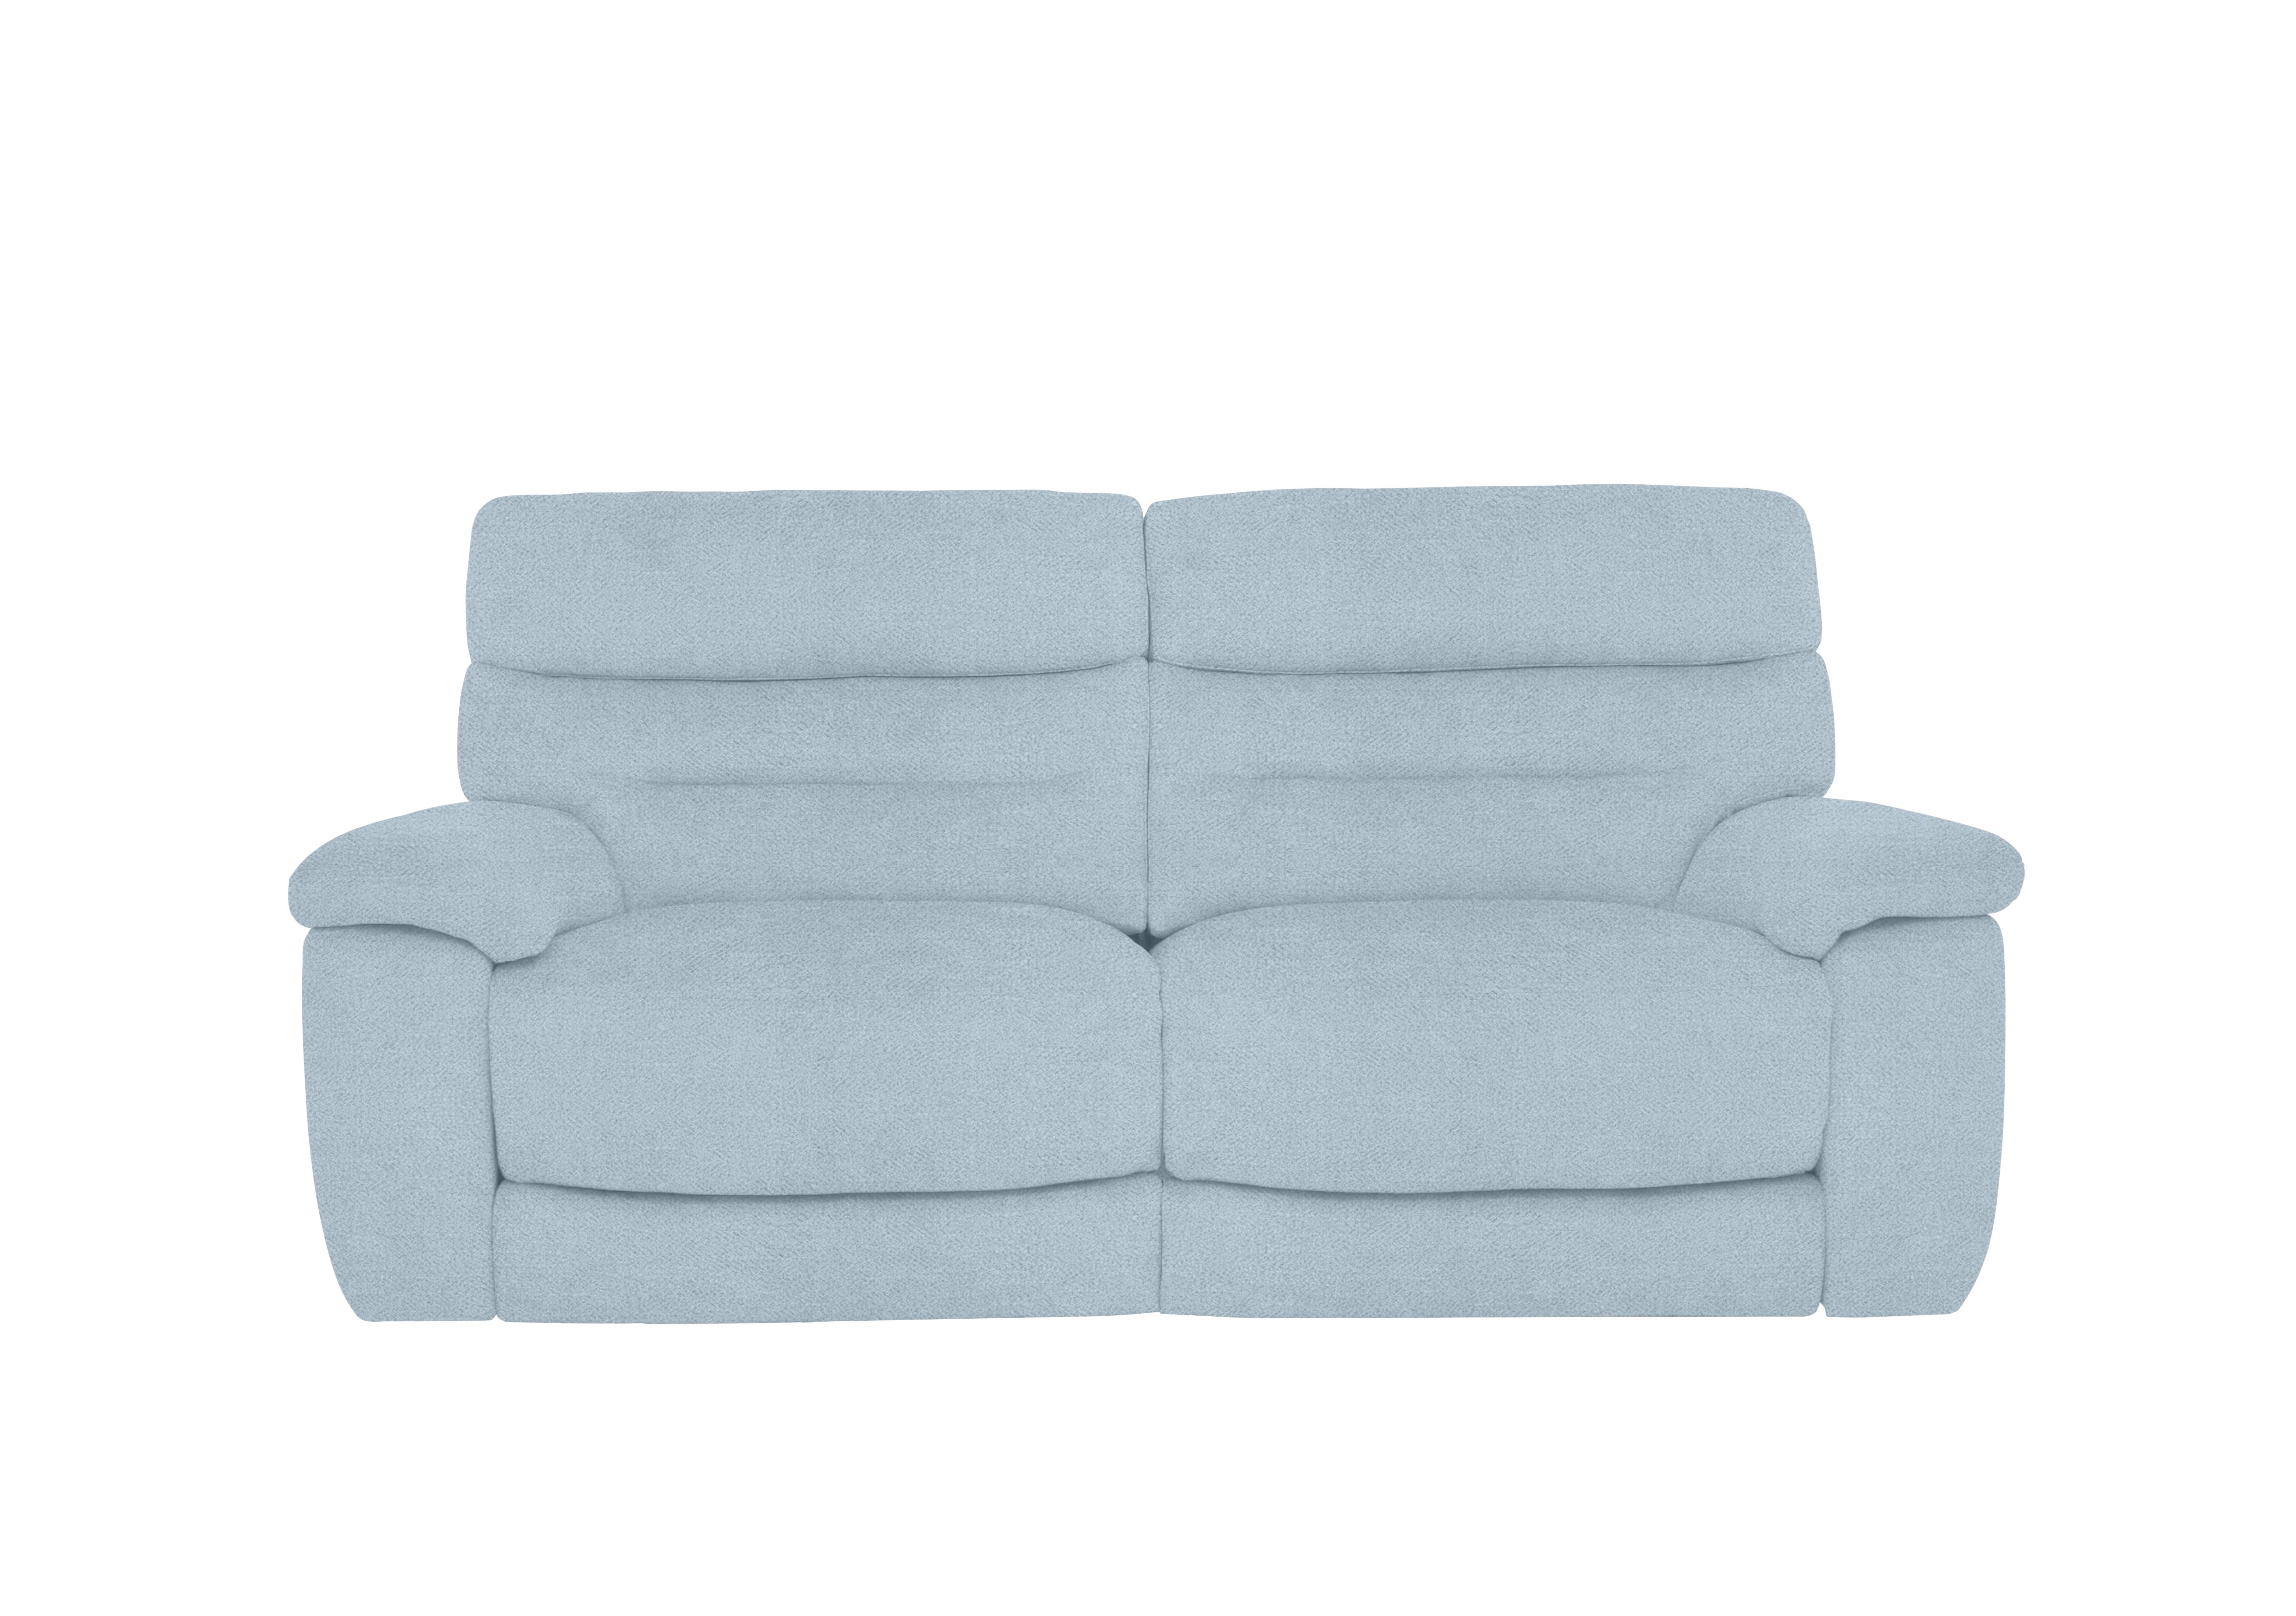 Nimbus 3 Seater Fabric Power Recliner Sofa with Power Headrests in Fab-Meo-R17 Baby Blue on Furniture Village